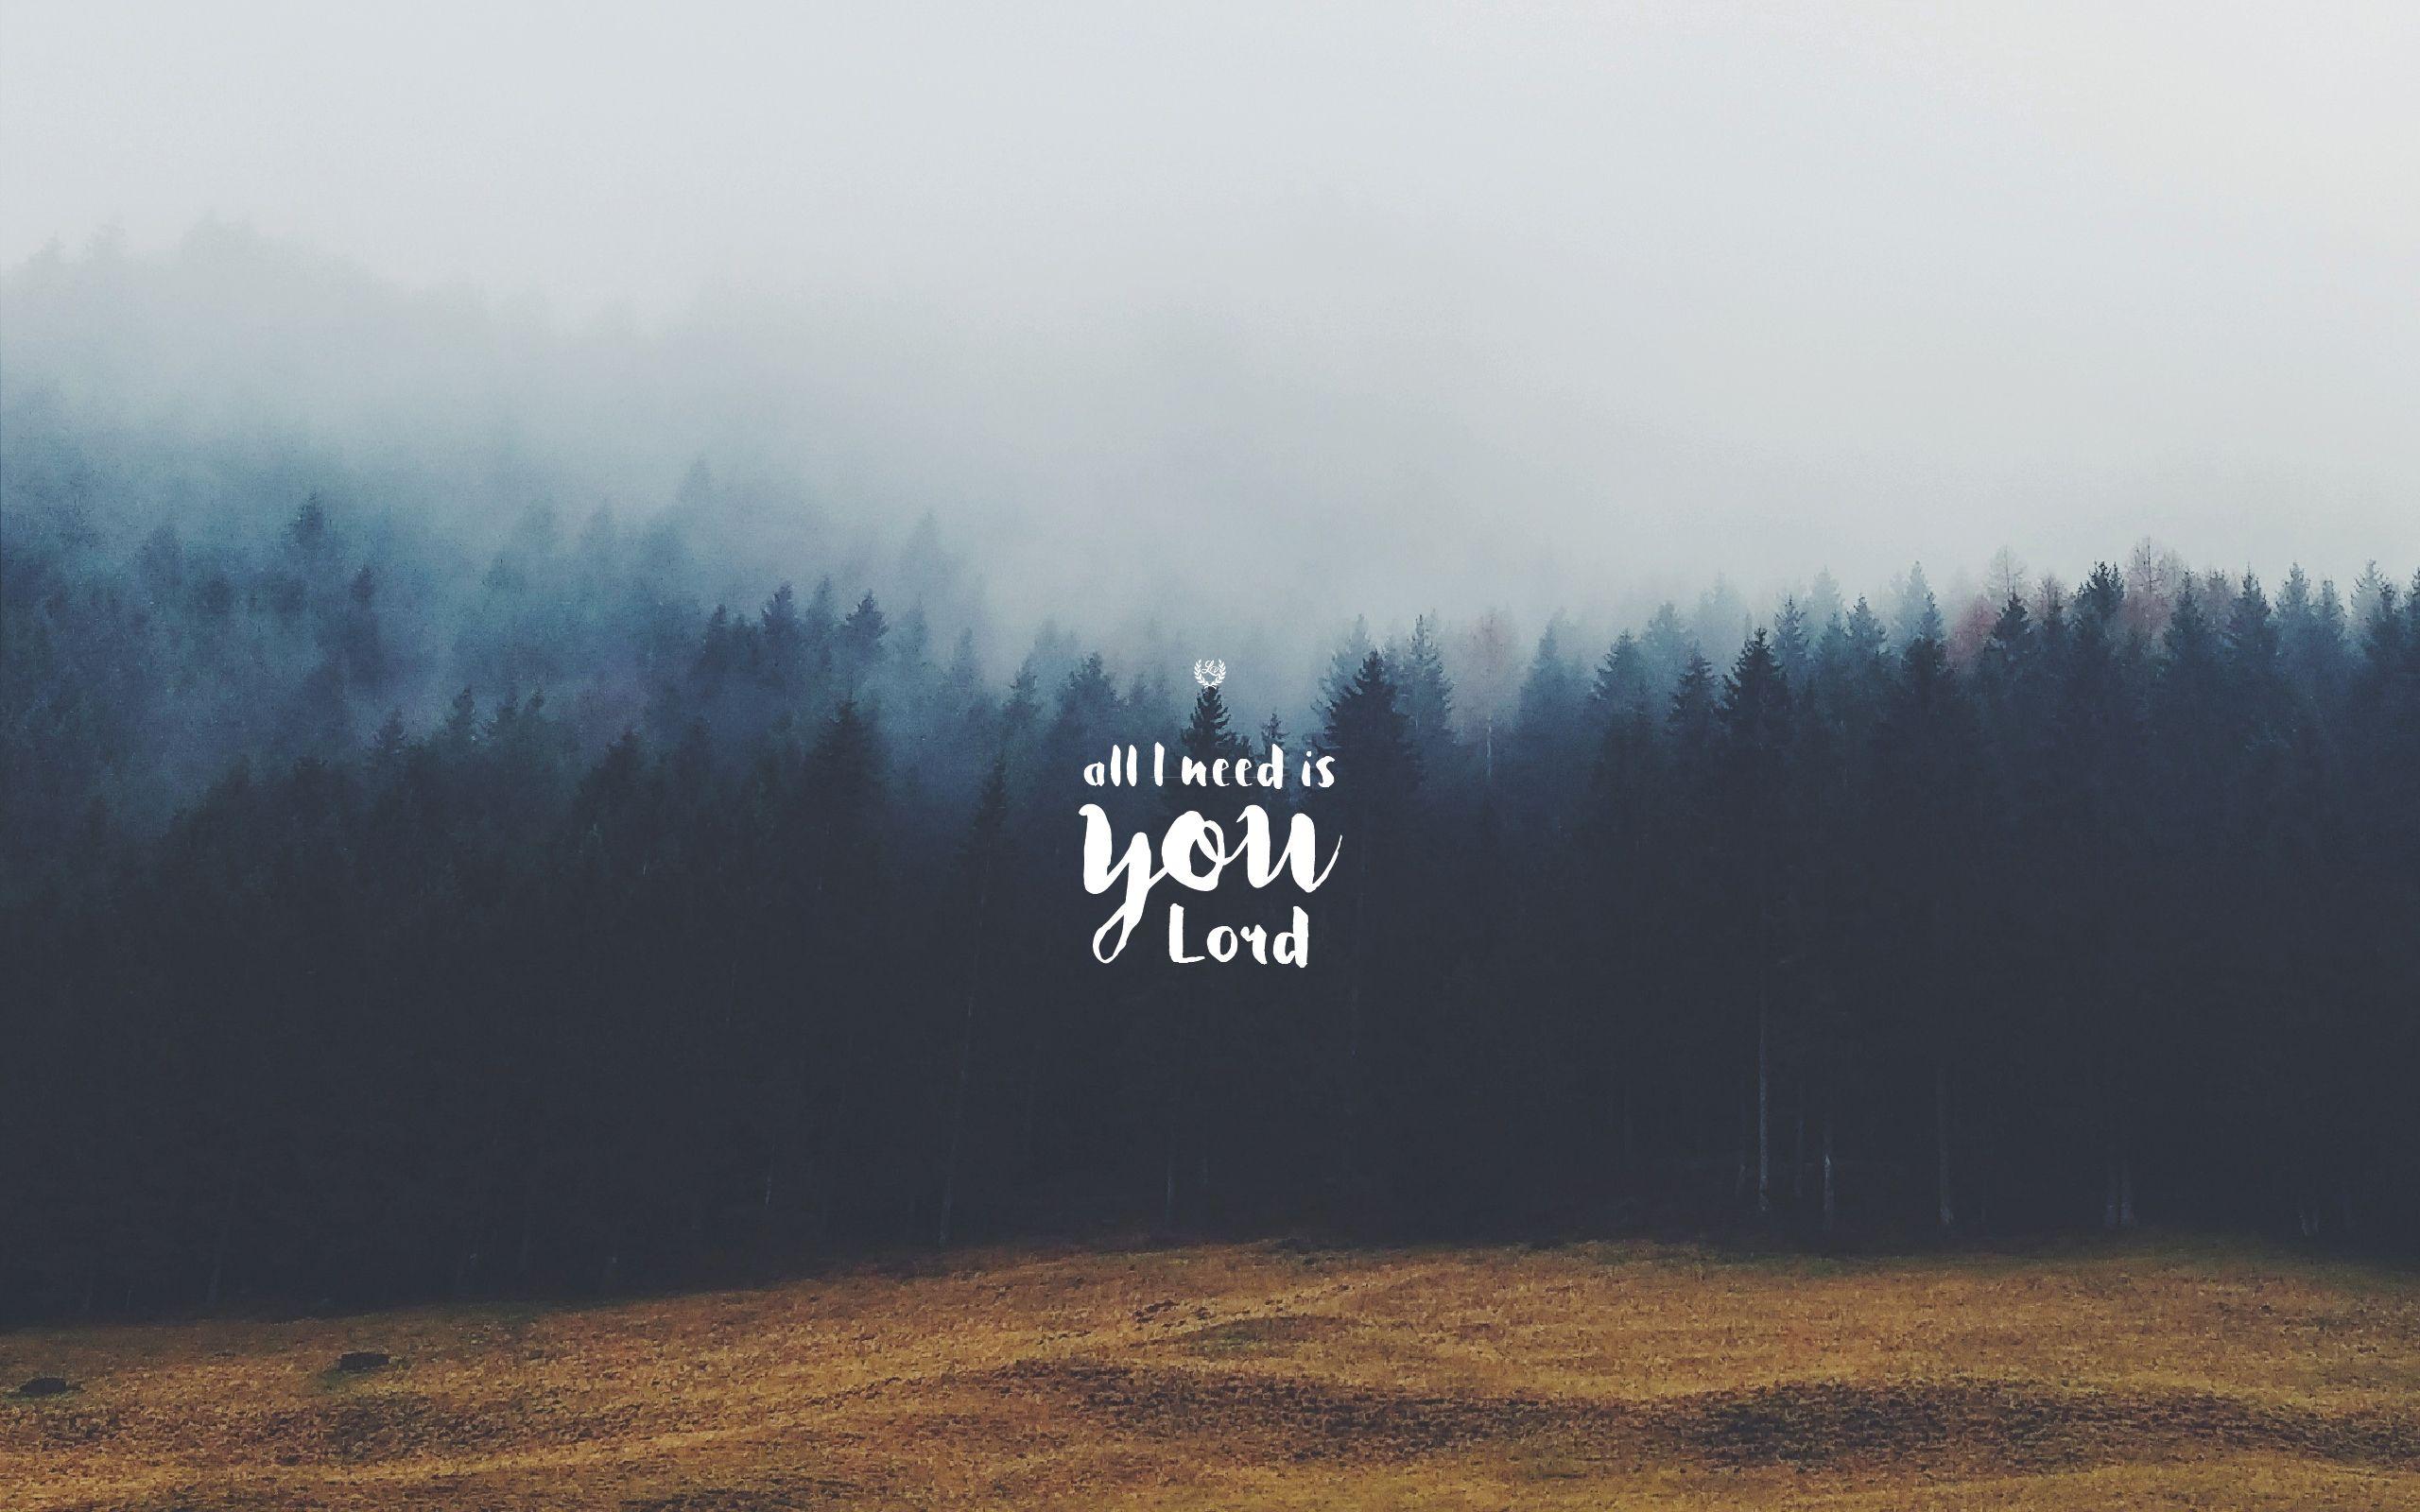 All I Need is You by Hillsong United // Laptop wallpaper format